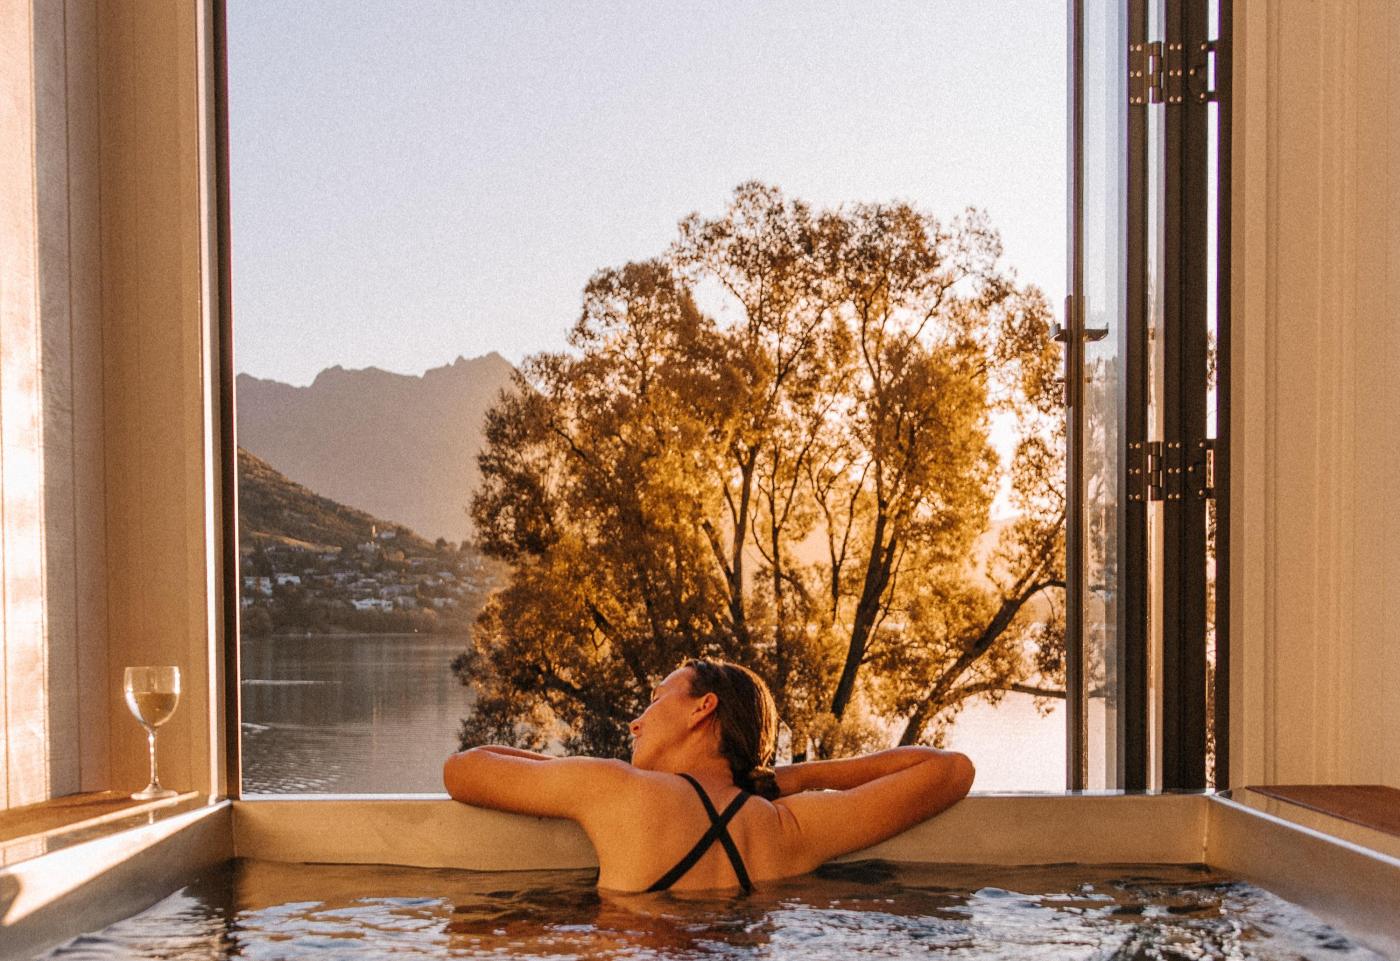 Person in hot tub with mountain and lake views in the background